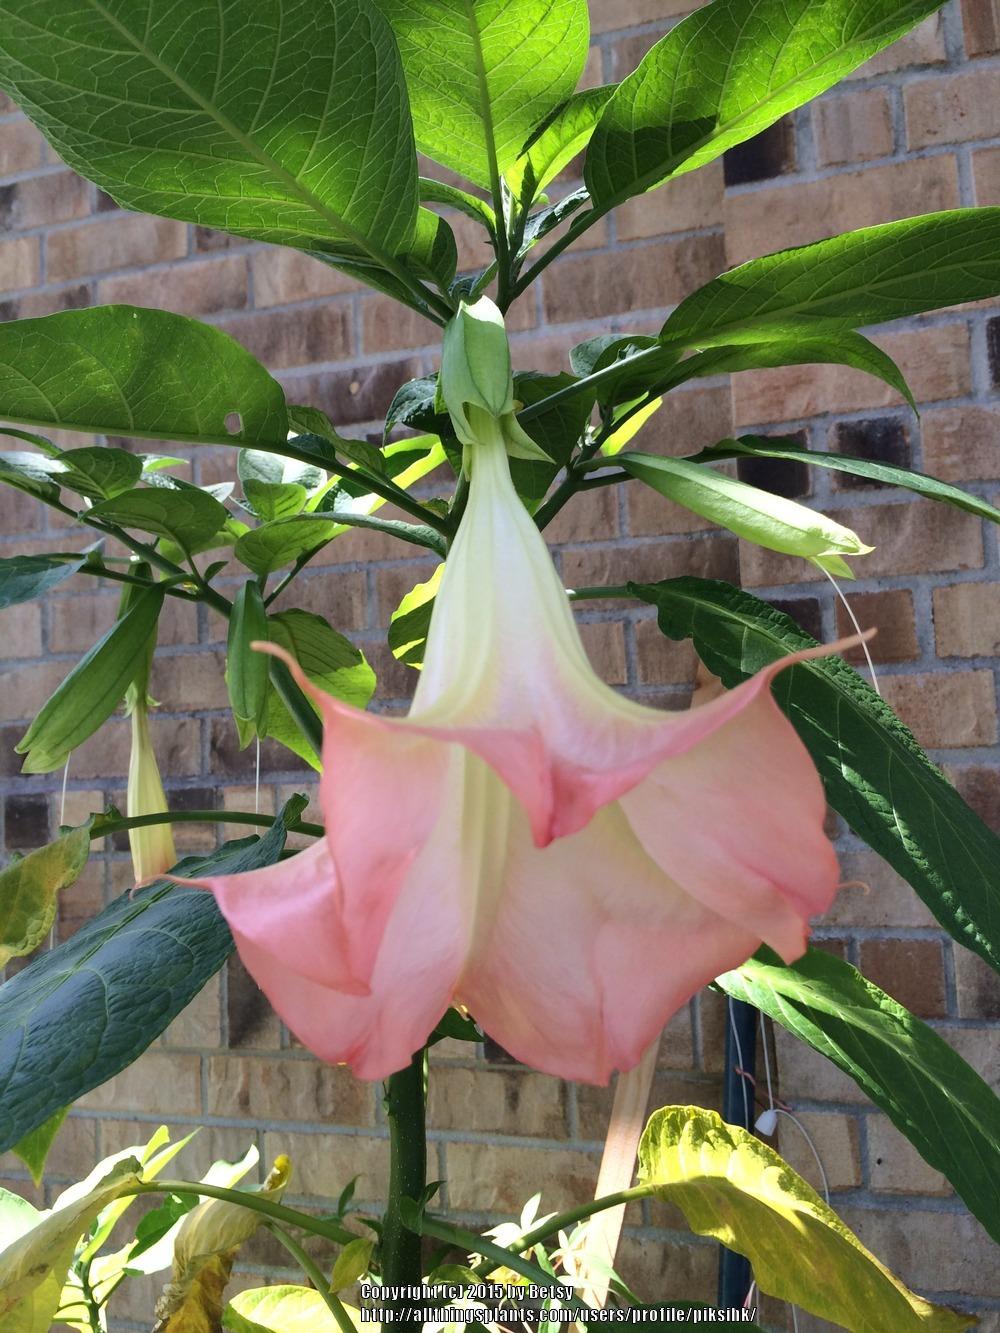 Photo of Angel's Trumpets (Brugmansia) uploaded by piksihk